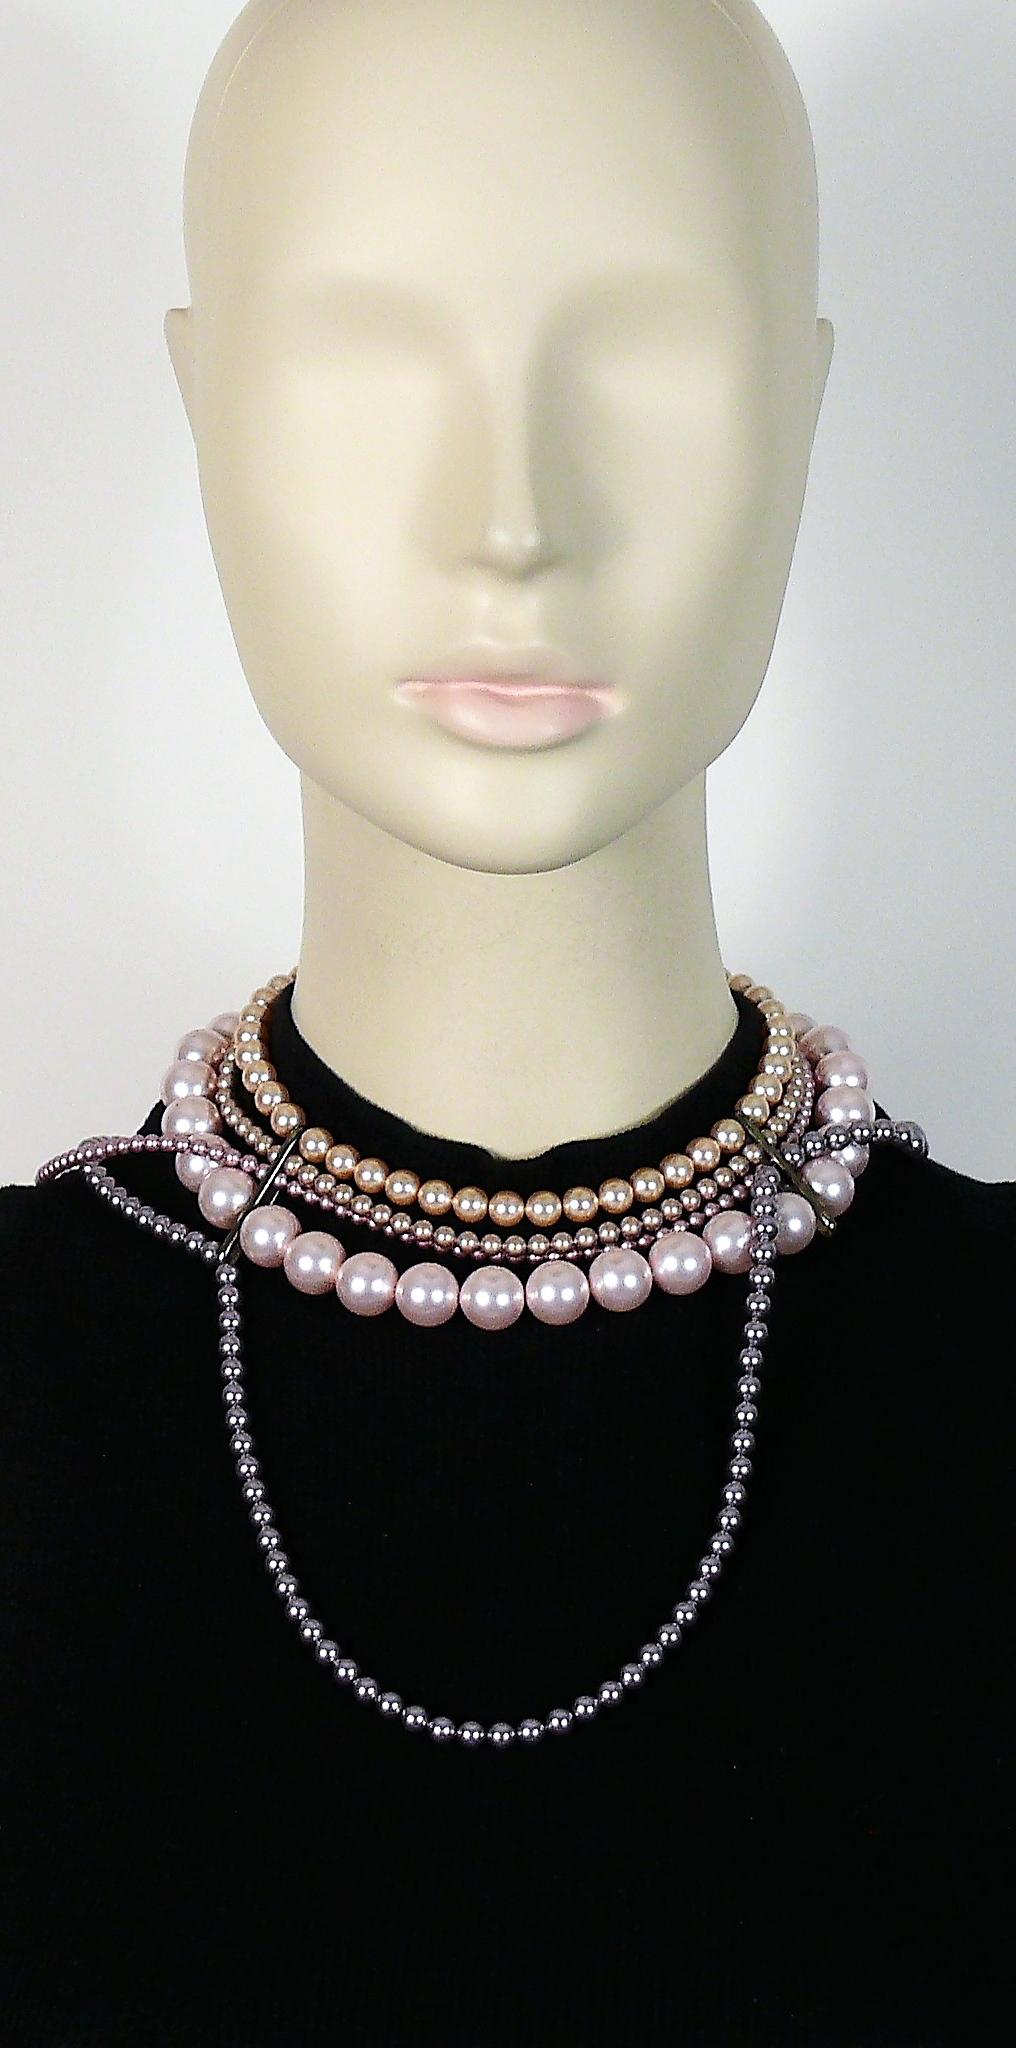 CELINE necklace featuring intertwined strands of multicolored faux glass pearls in shades of powder pink, purple, champagne...

Gun patina hardware.

CELINE logo charm.

Indicative measurements : length approx. 37 cm (14.57 inches).

JEWELRY